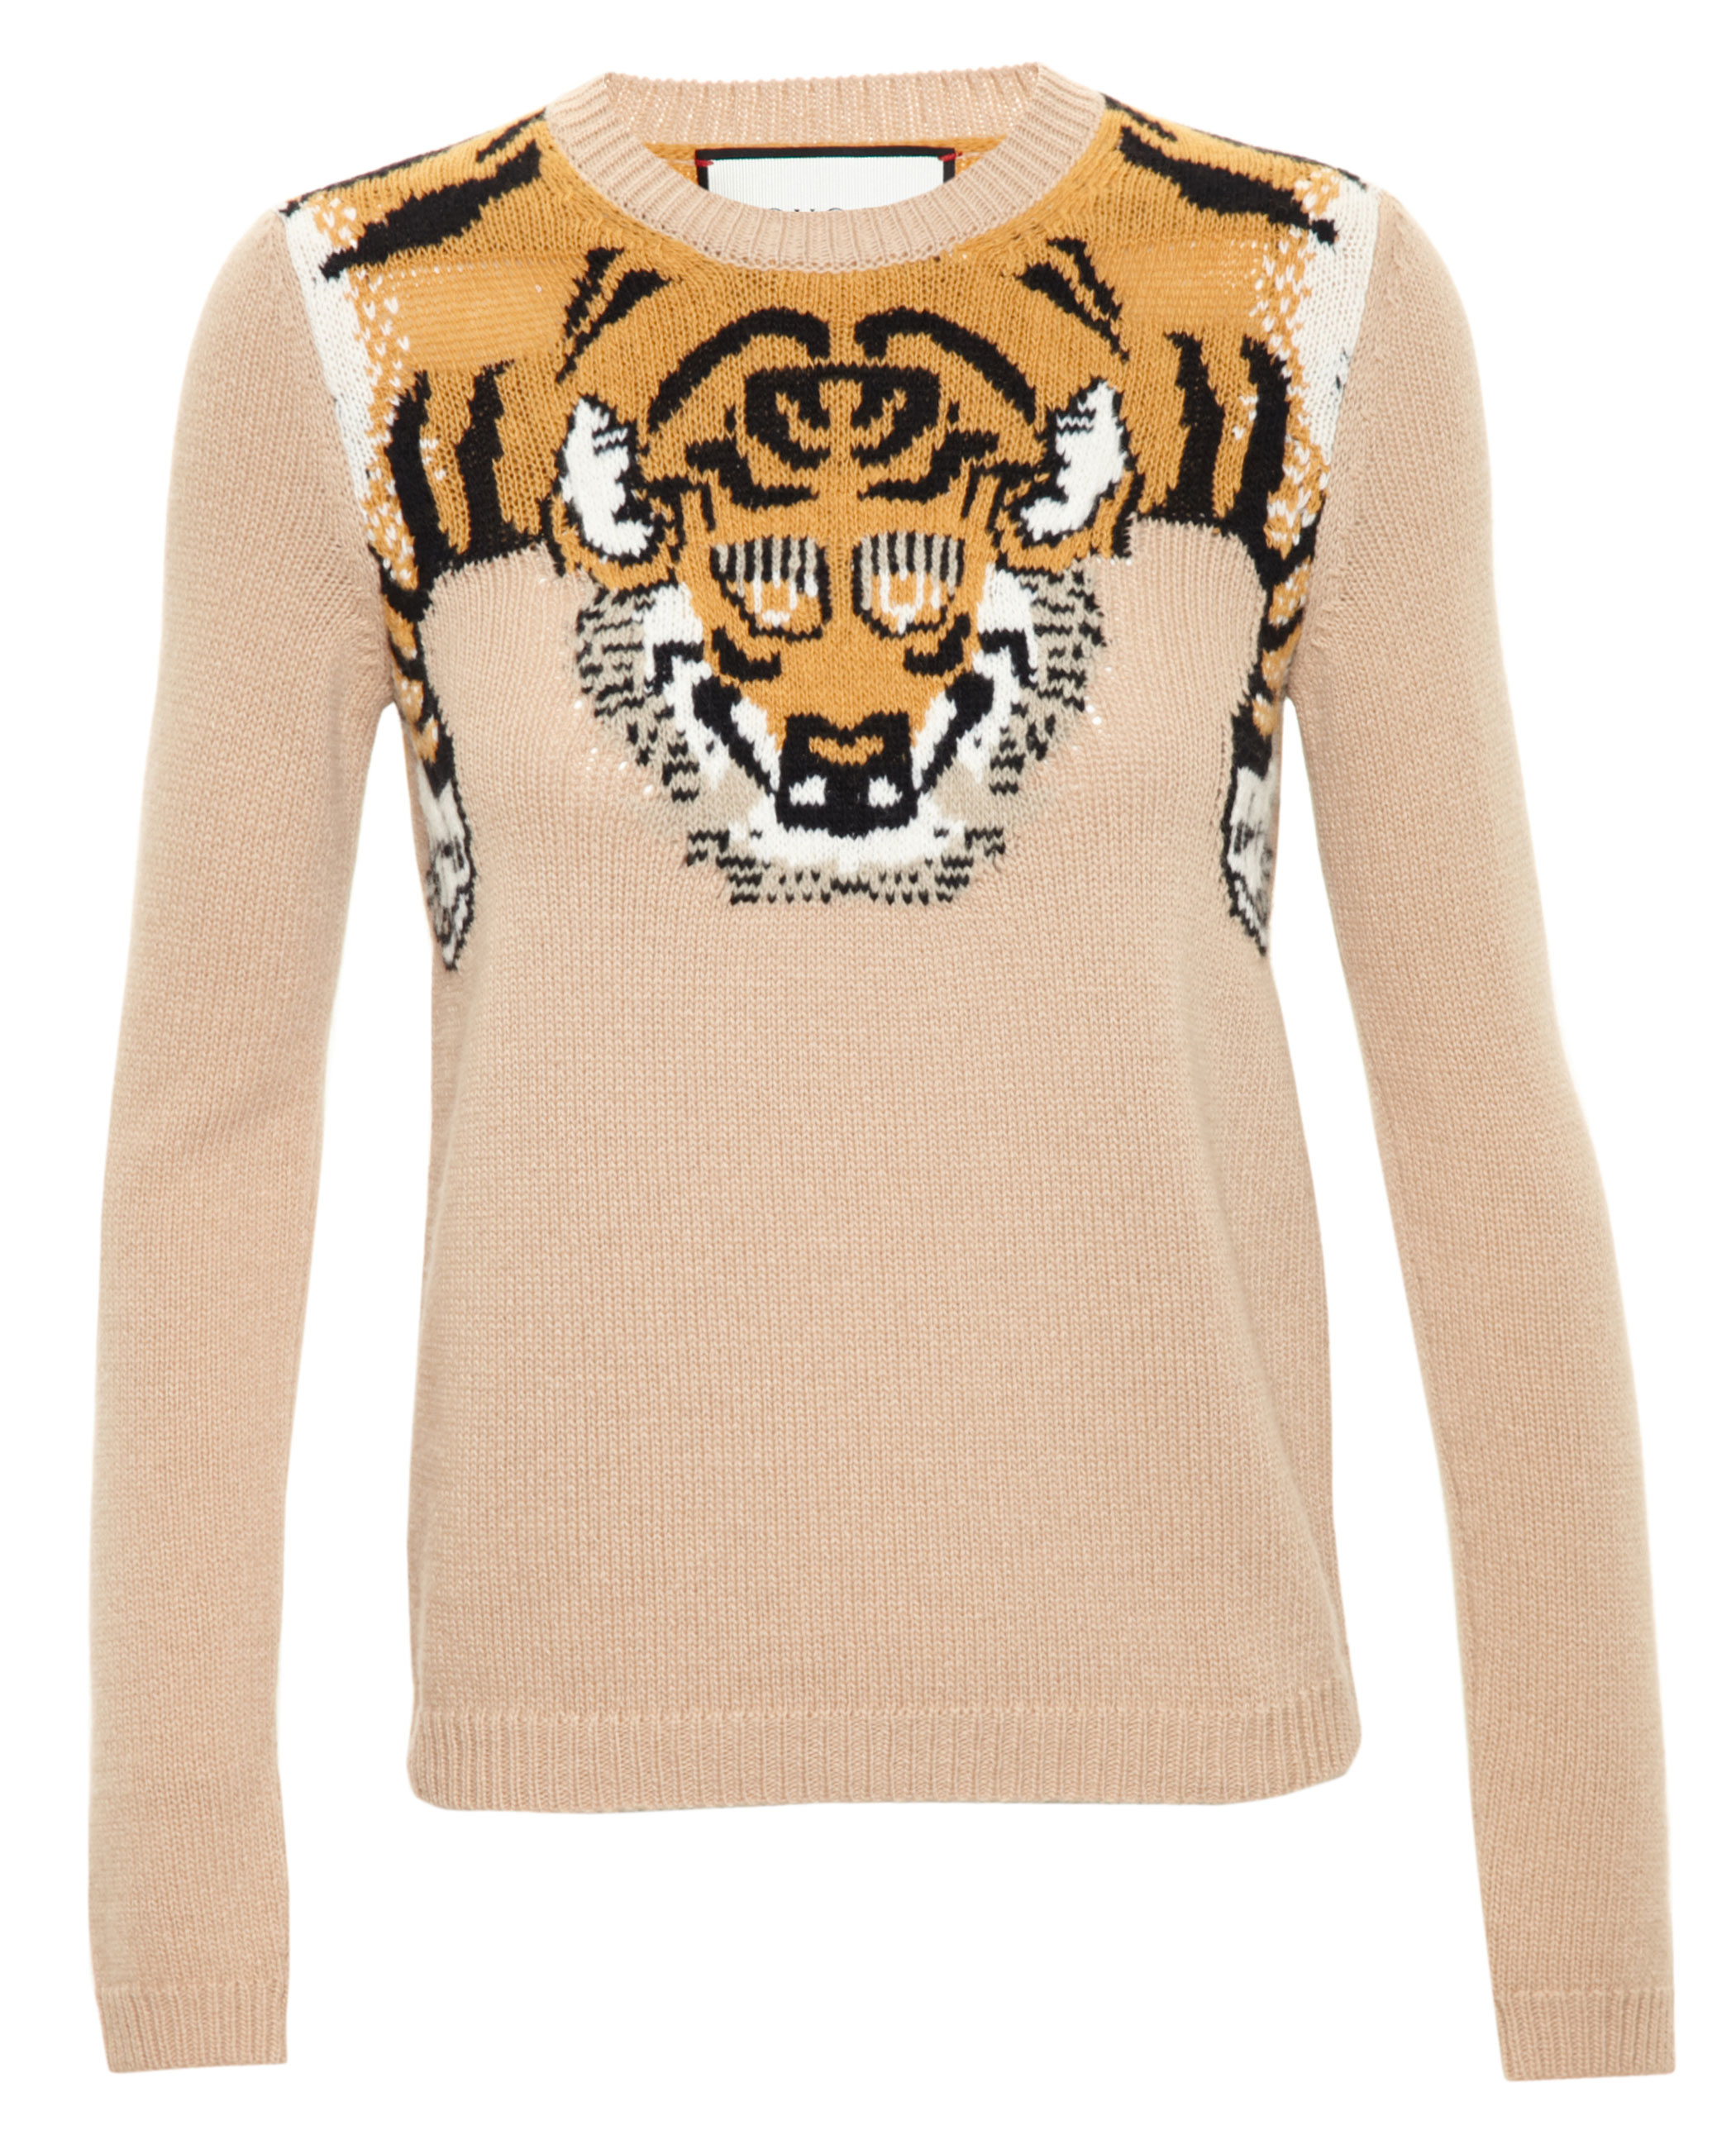 gucci wool sweater with tiger off 51% - www.intolegalworld.com